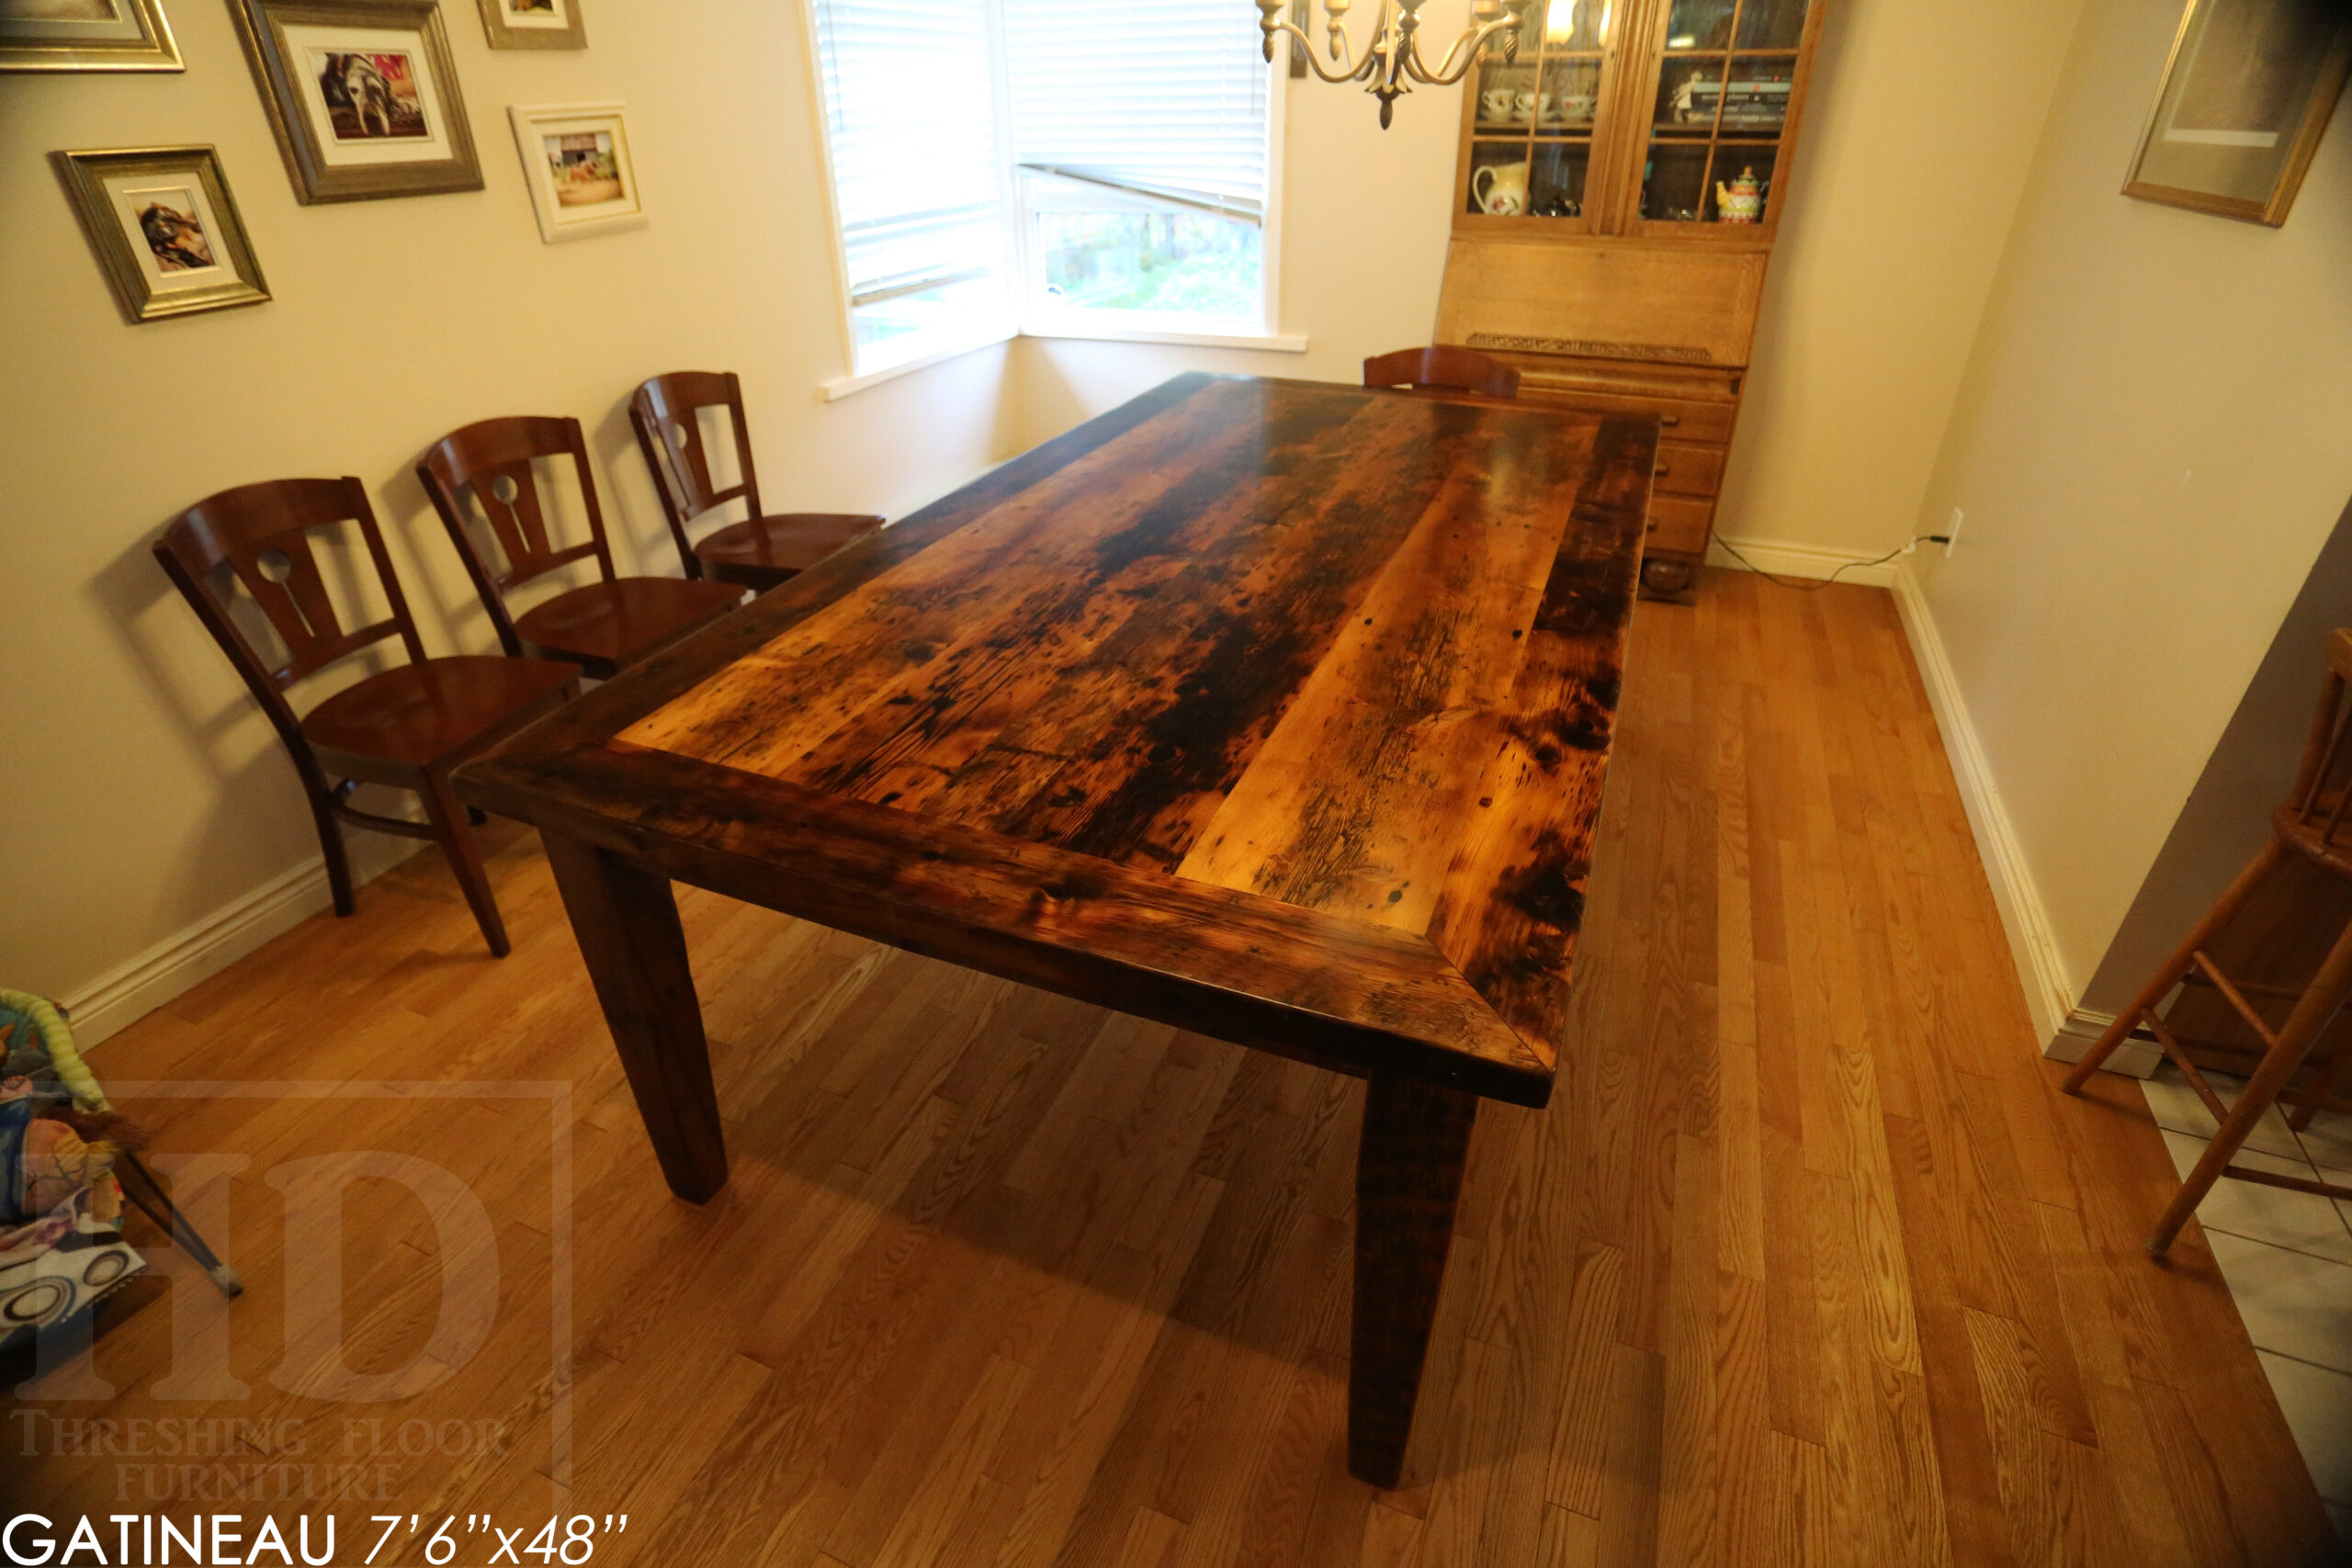 7' 6" Reclaimed Wood Harvest Table we made for a Gatineau, Quebec home - 48" wide - Tapered with a Notch Windbrace Beam Legs - Hemlock Ontario Barnwood Threshing Floor 2" Top - Original edges & distressing maintained - Premium epoxy + matte polyurethane finish - www.table.ca